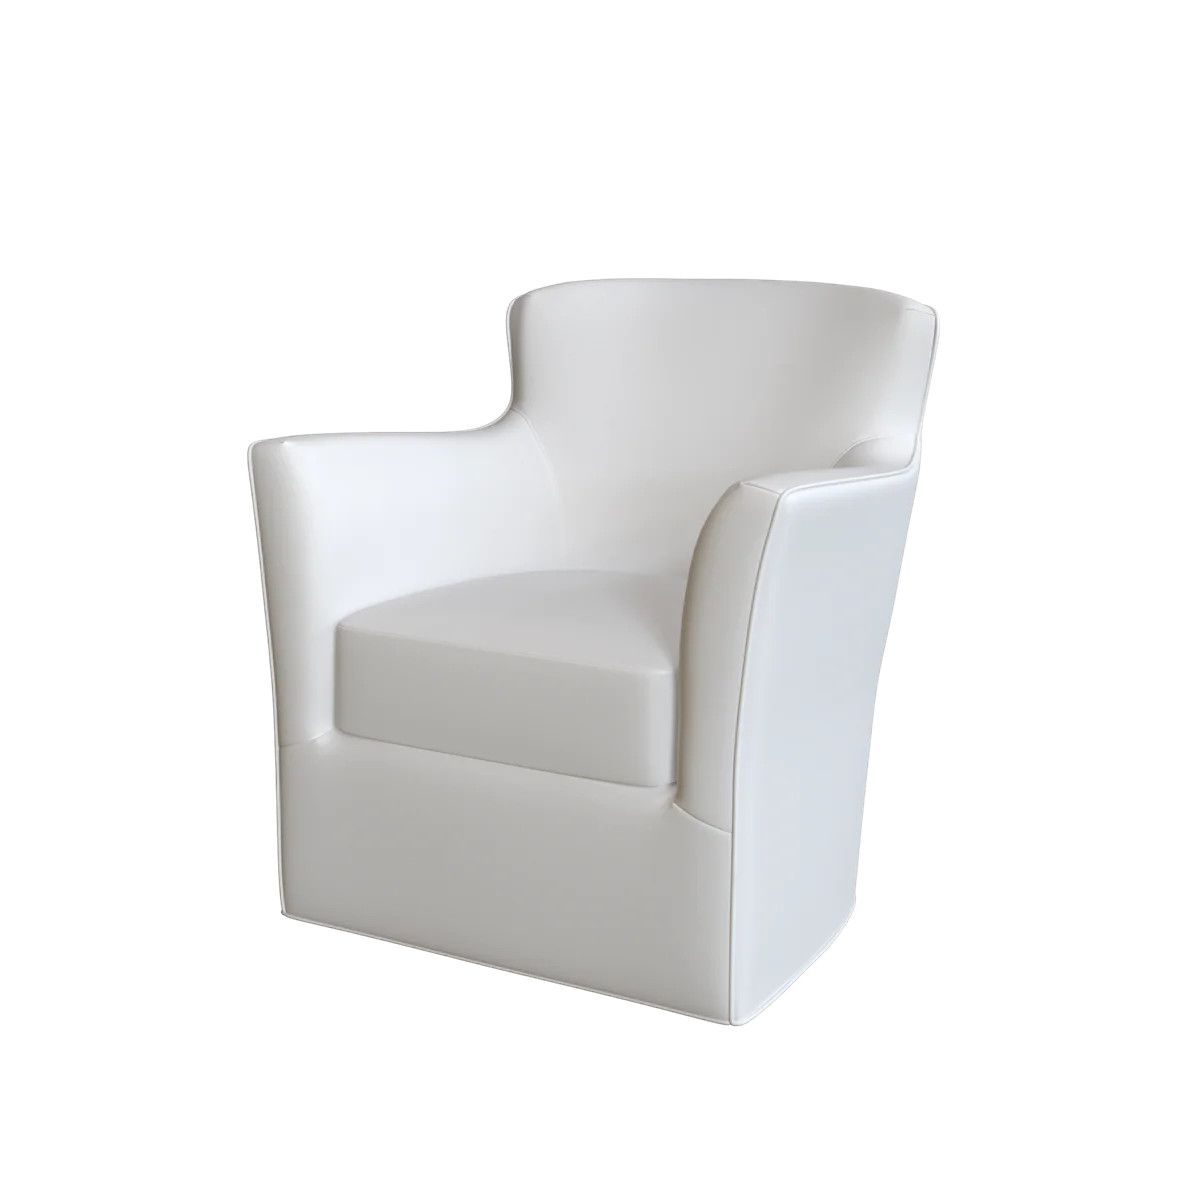 Myers Swivel | coley home